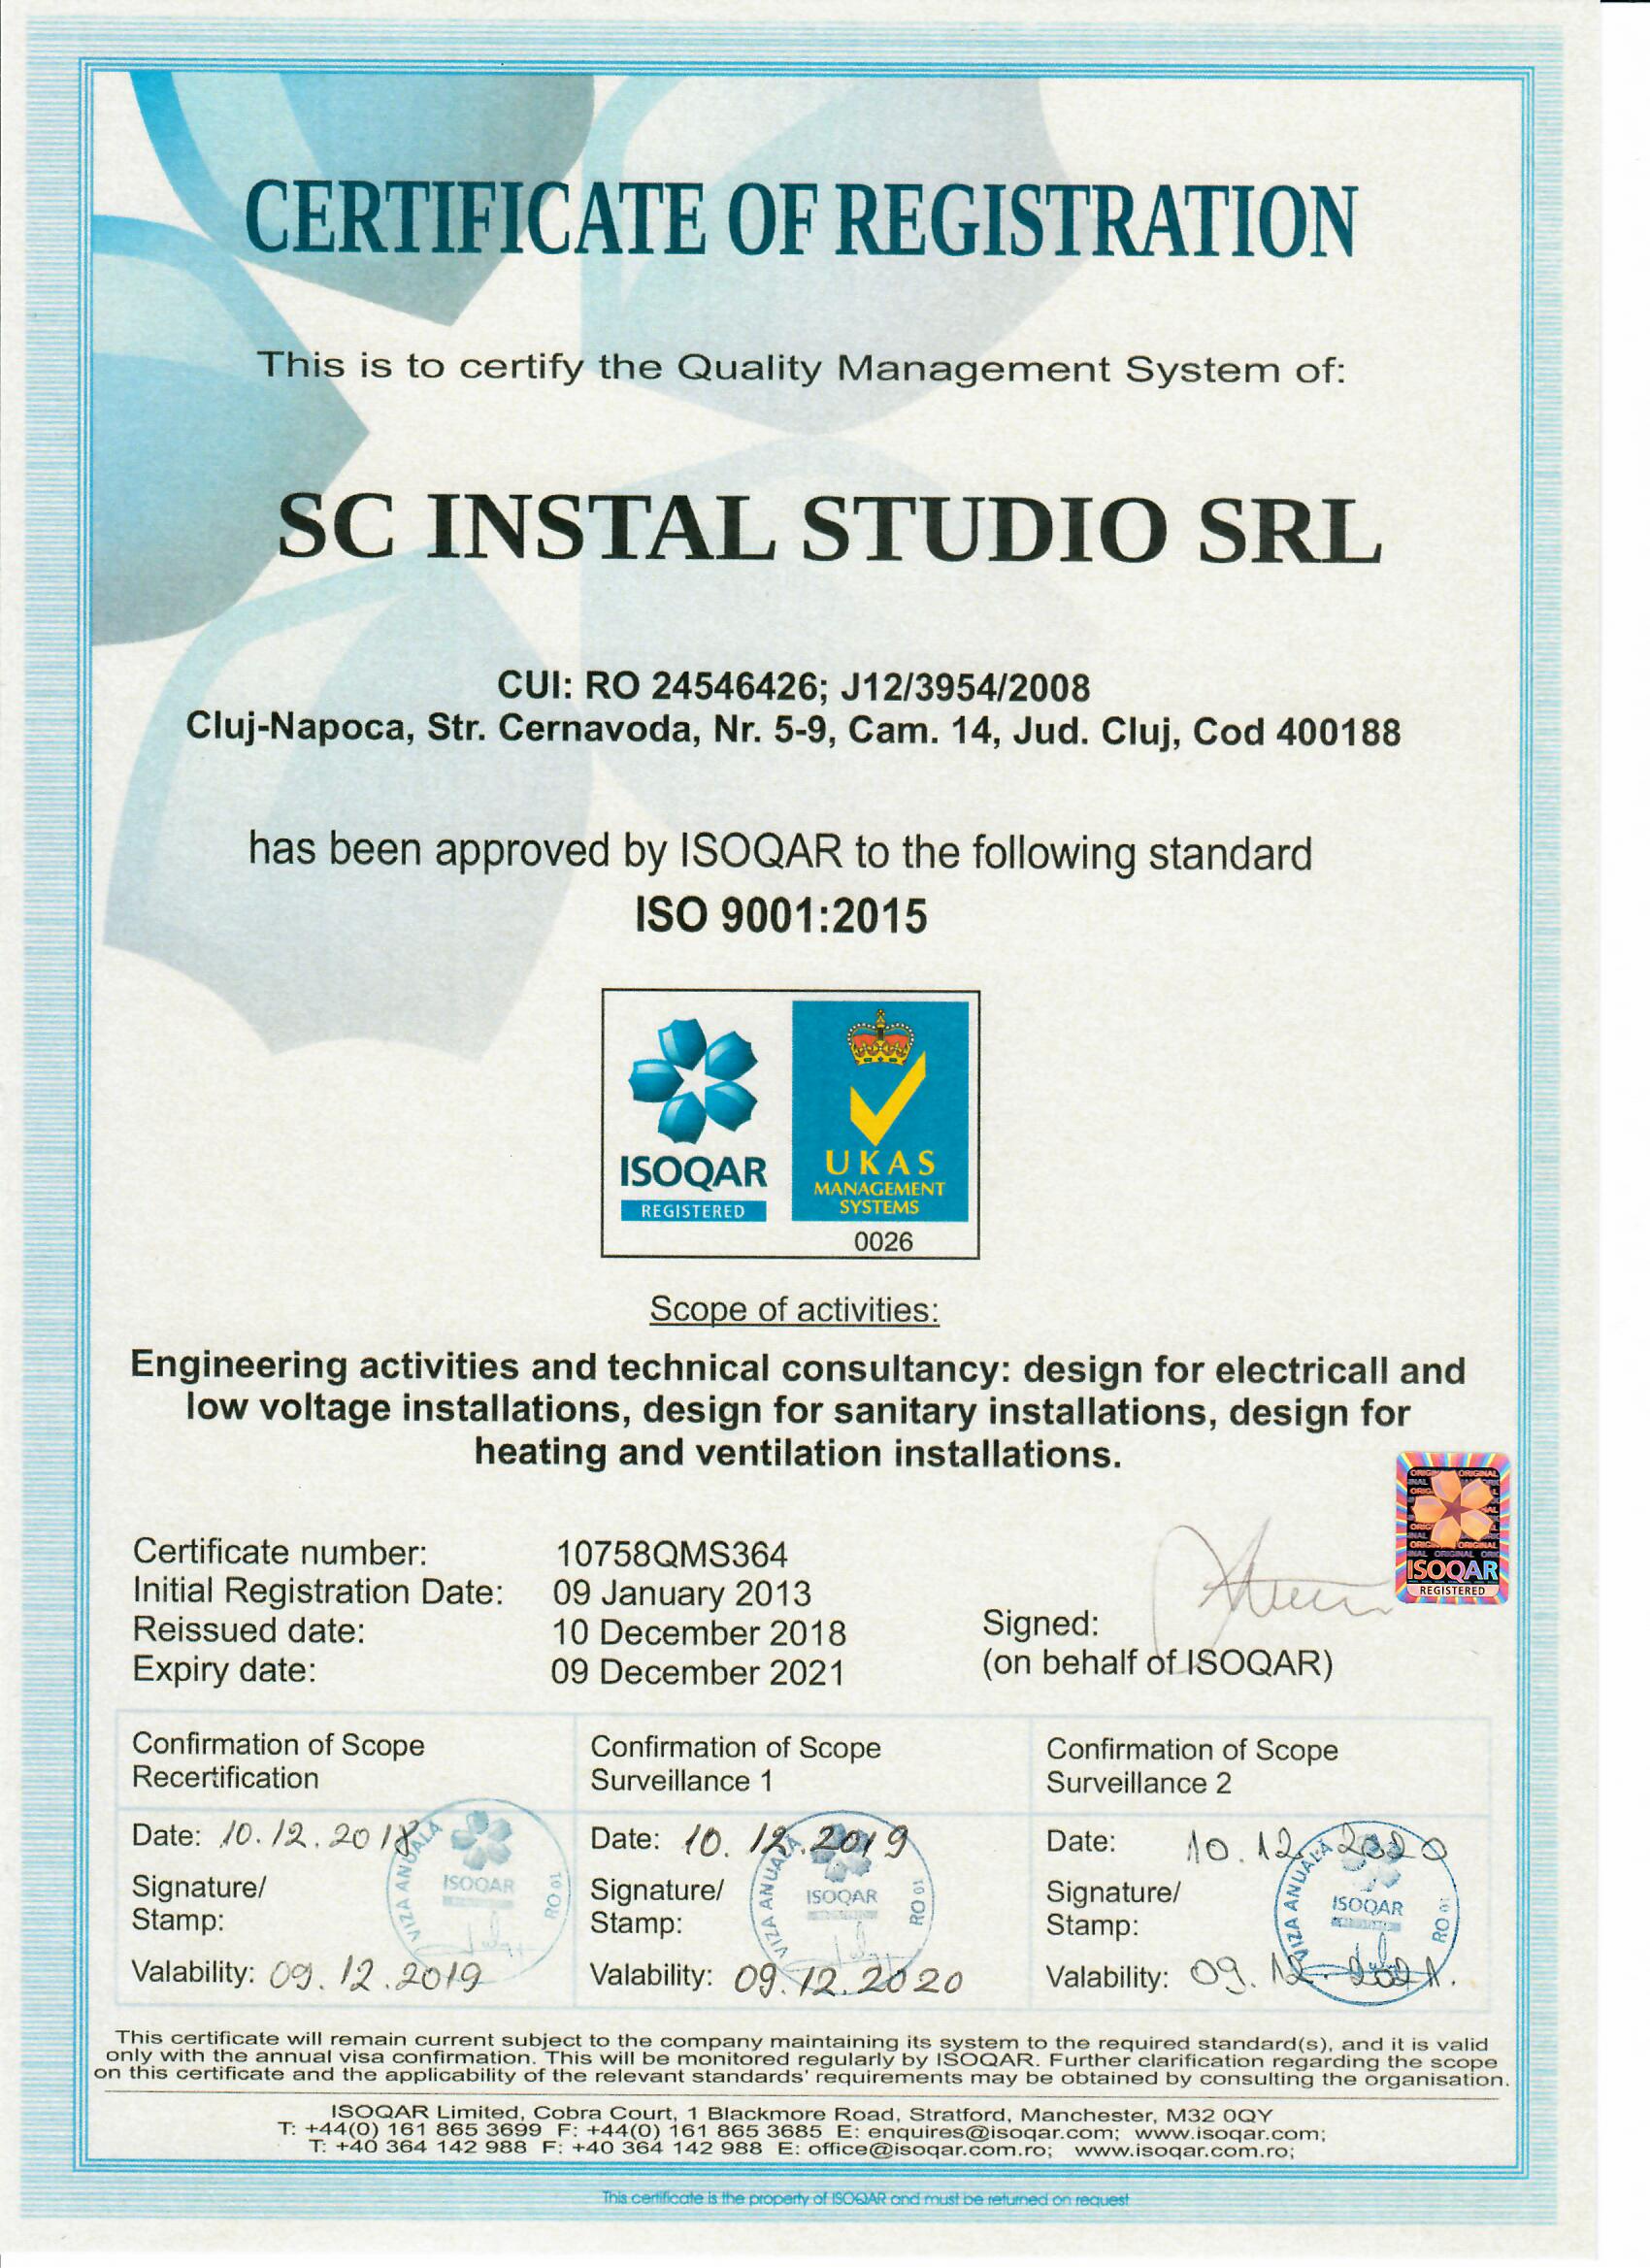 Certificate for the Quality Management System